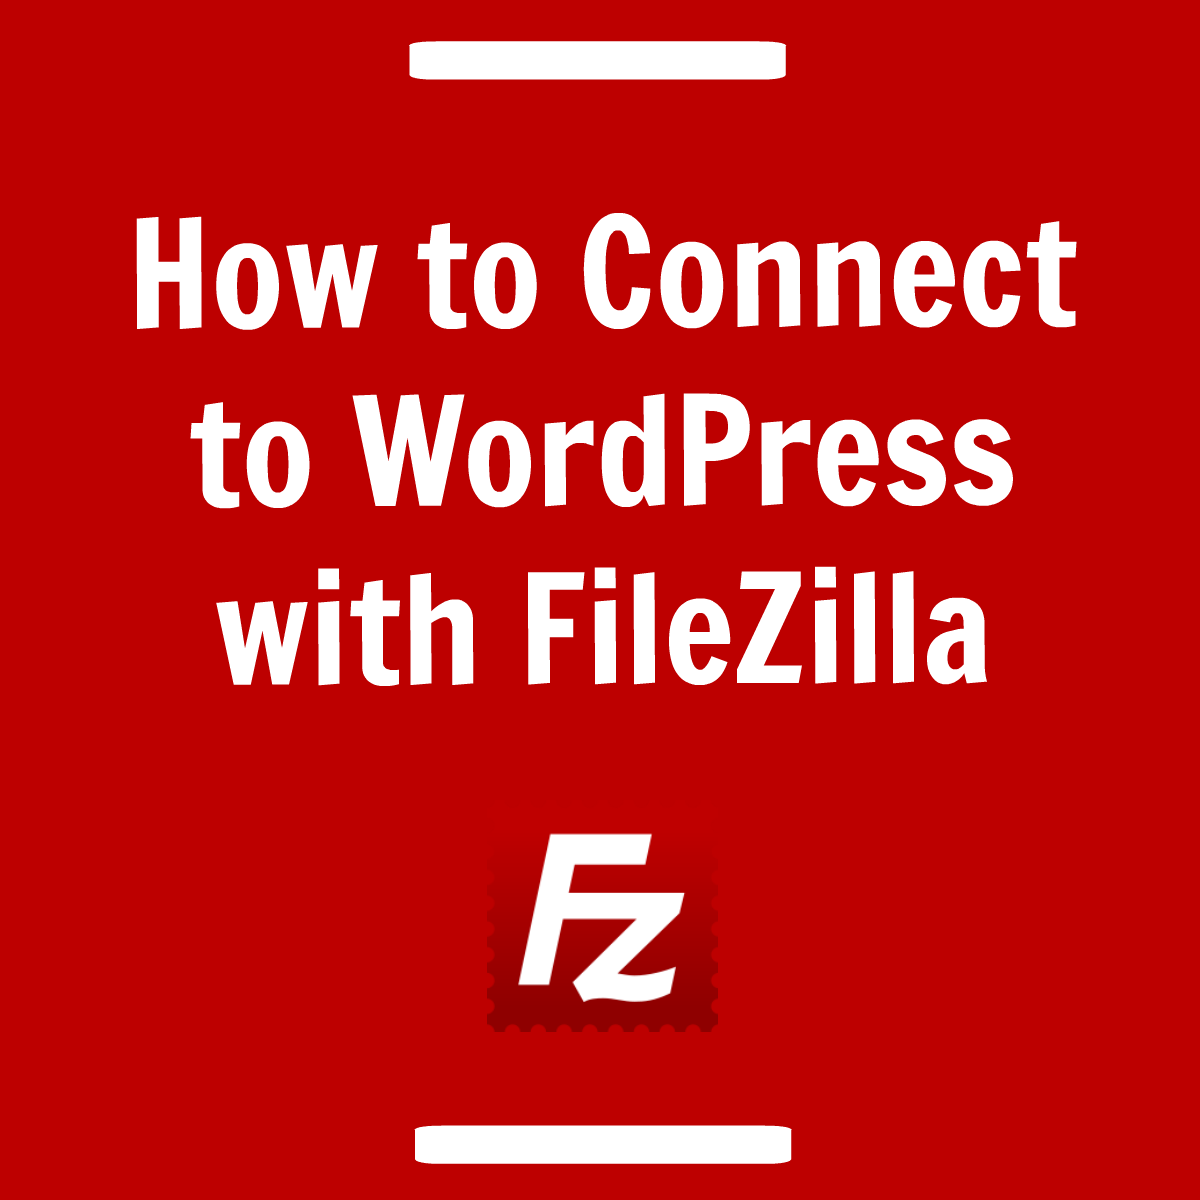 How to Connect to WordPress with FTP SFTP Filezilla